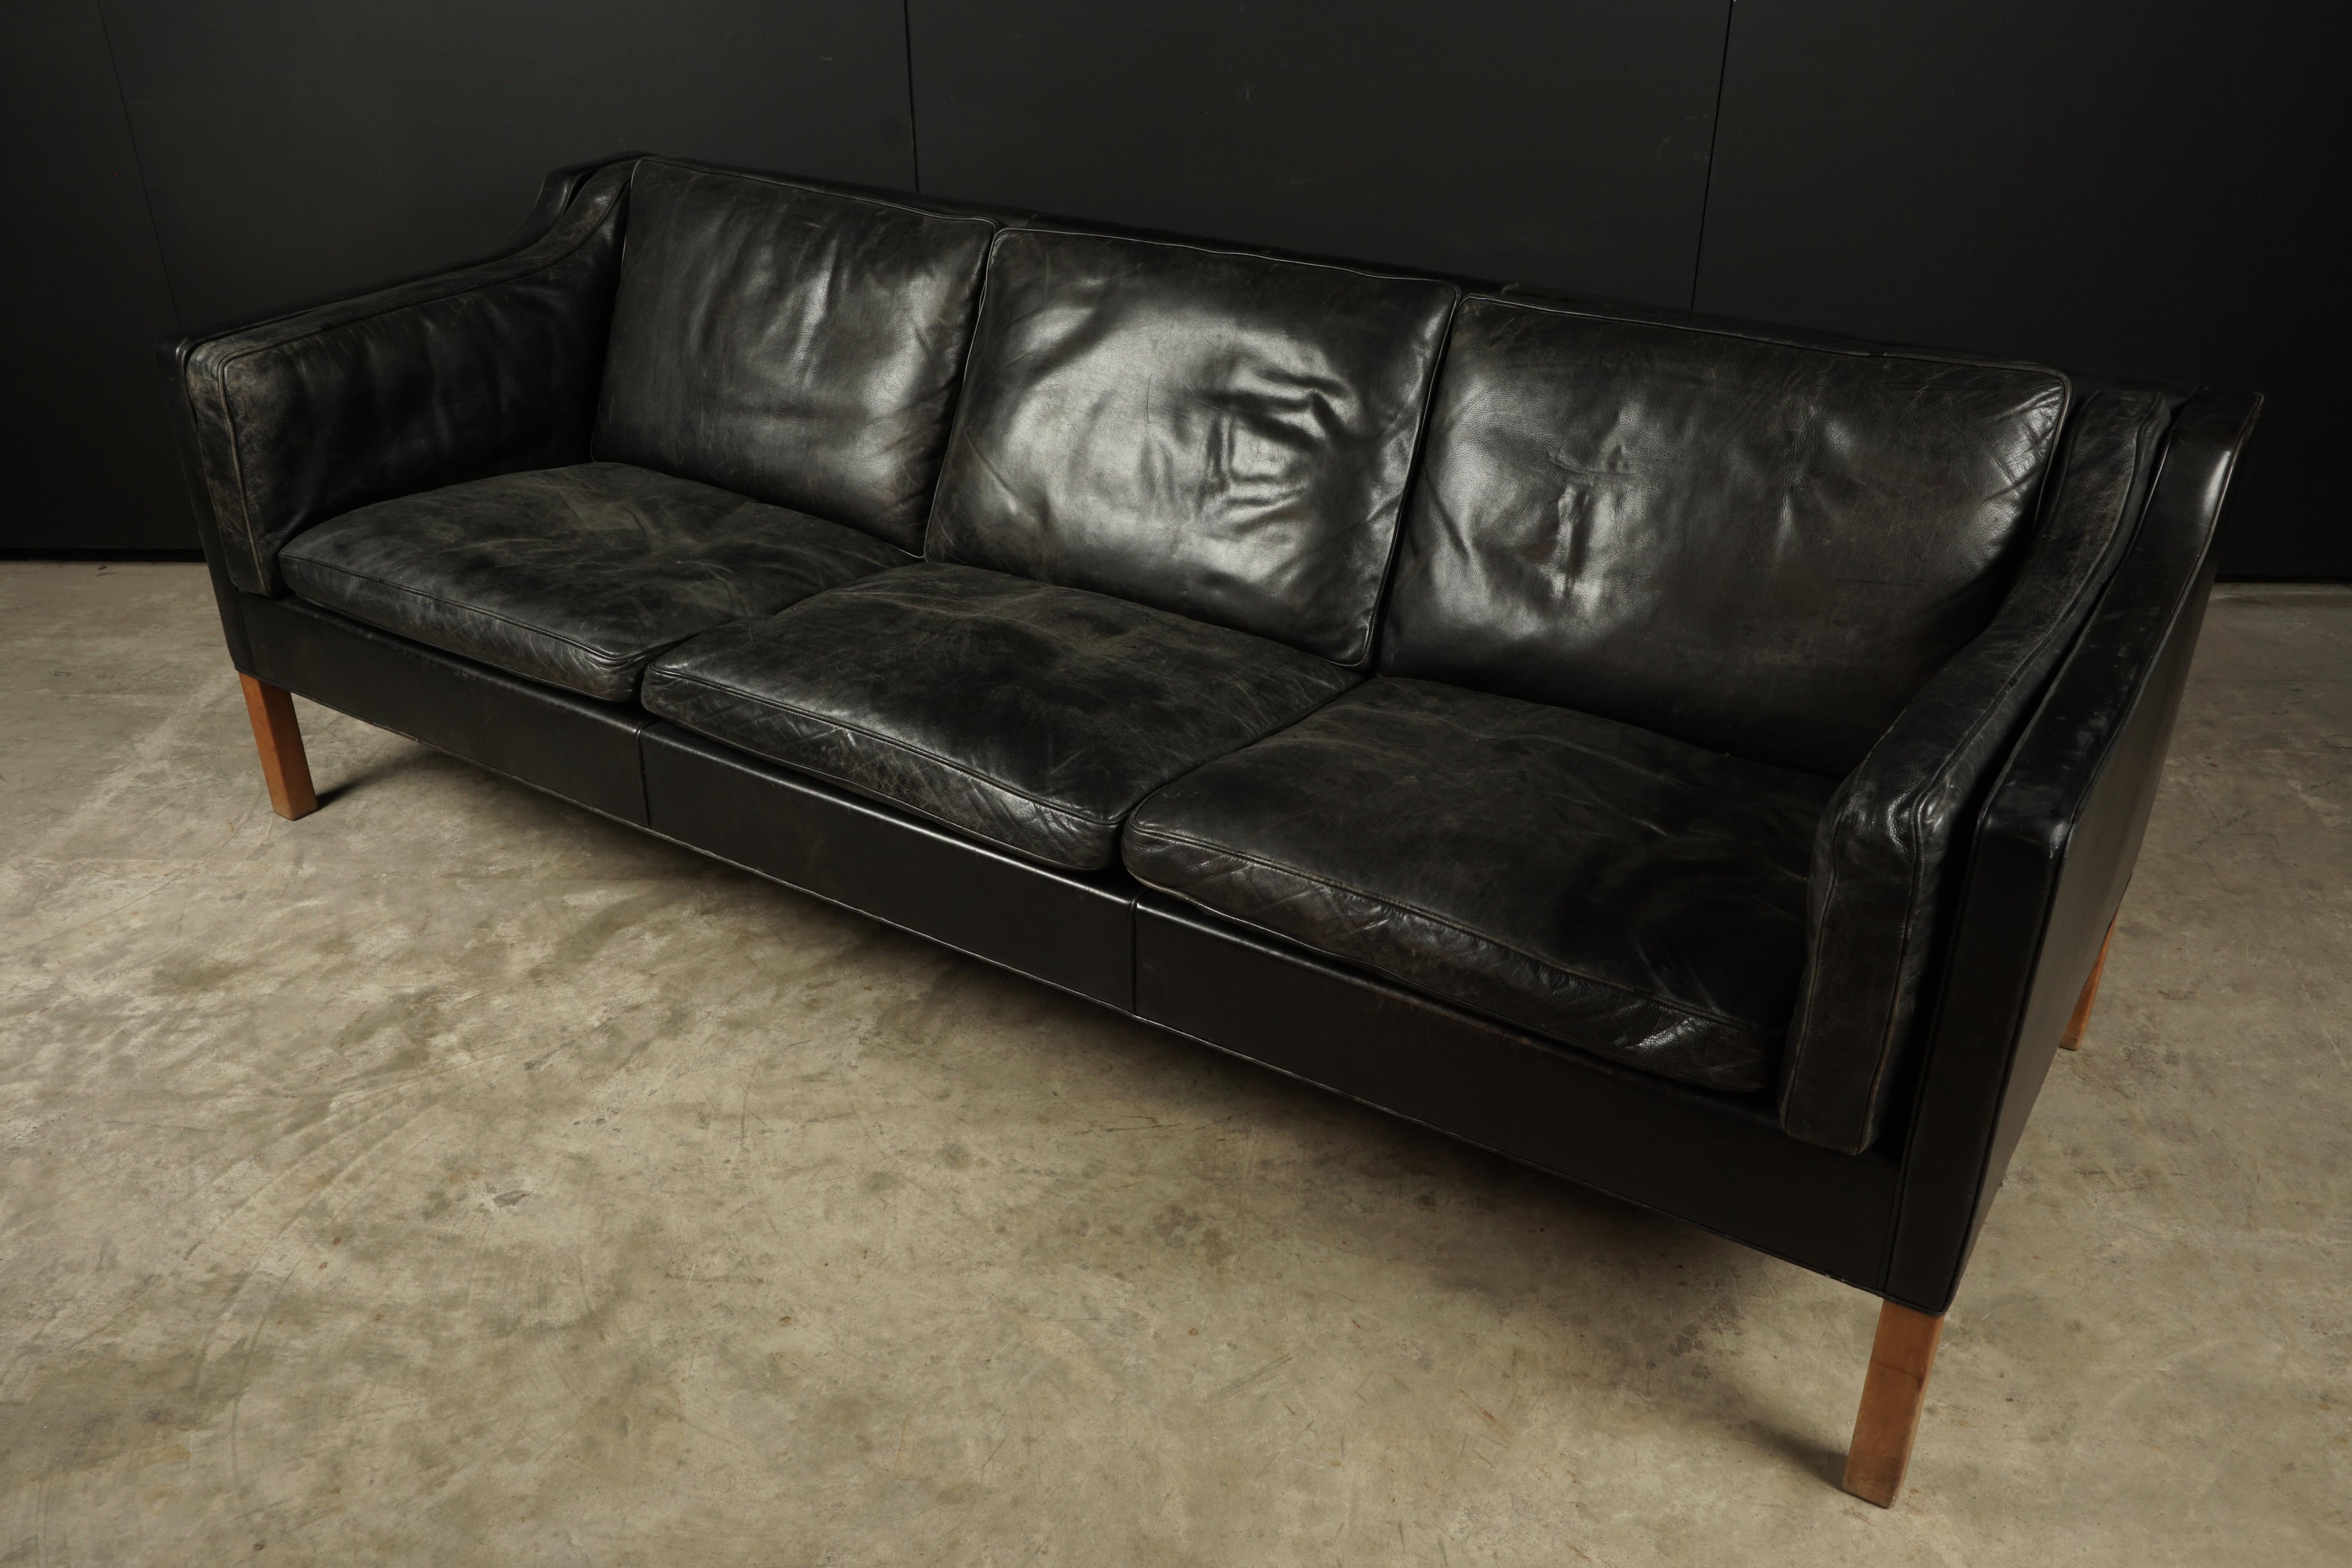 Vintage Borge Mogensen three-seat leather sofa, model 2213, 1980s. Original black leather upholstery with great wear and patina. Extremely comfortable.